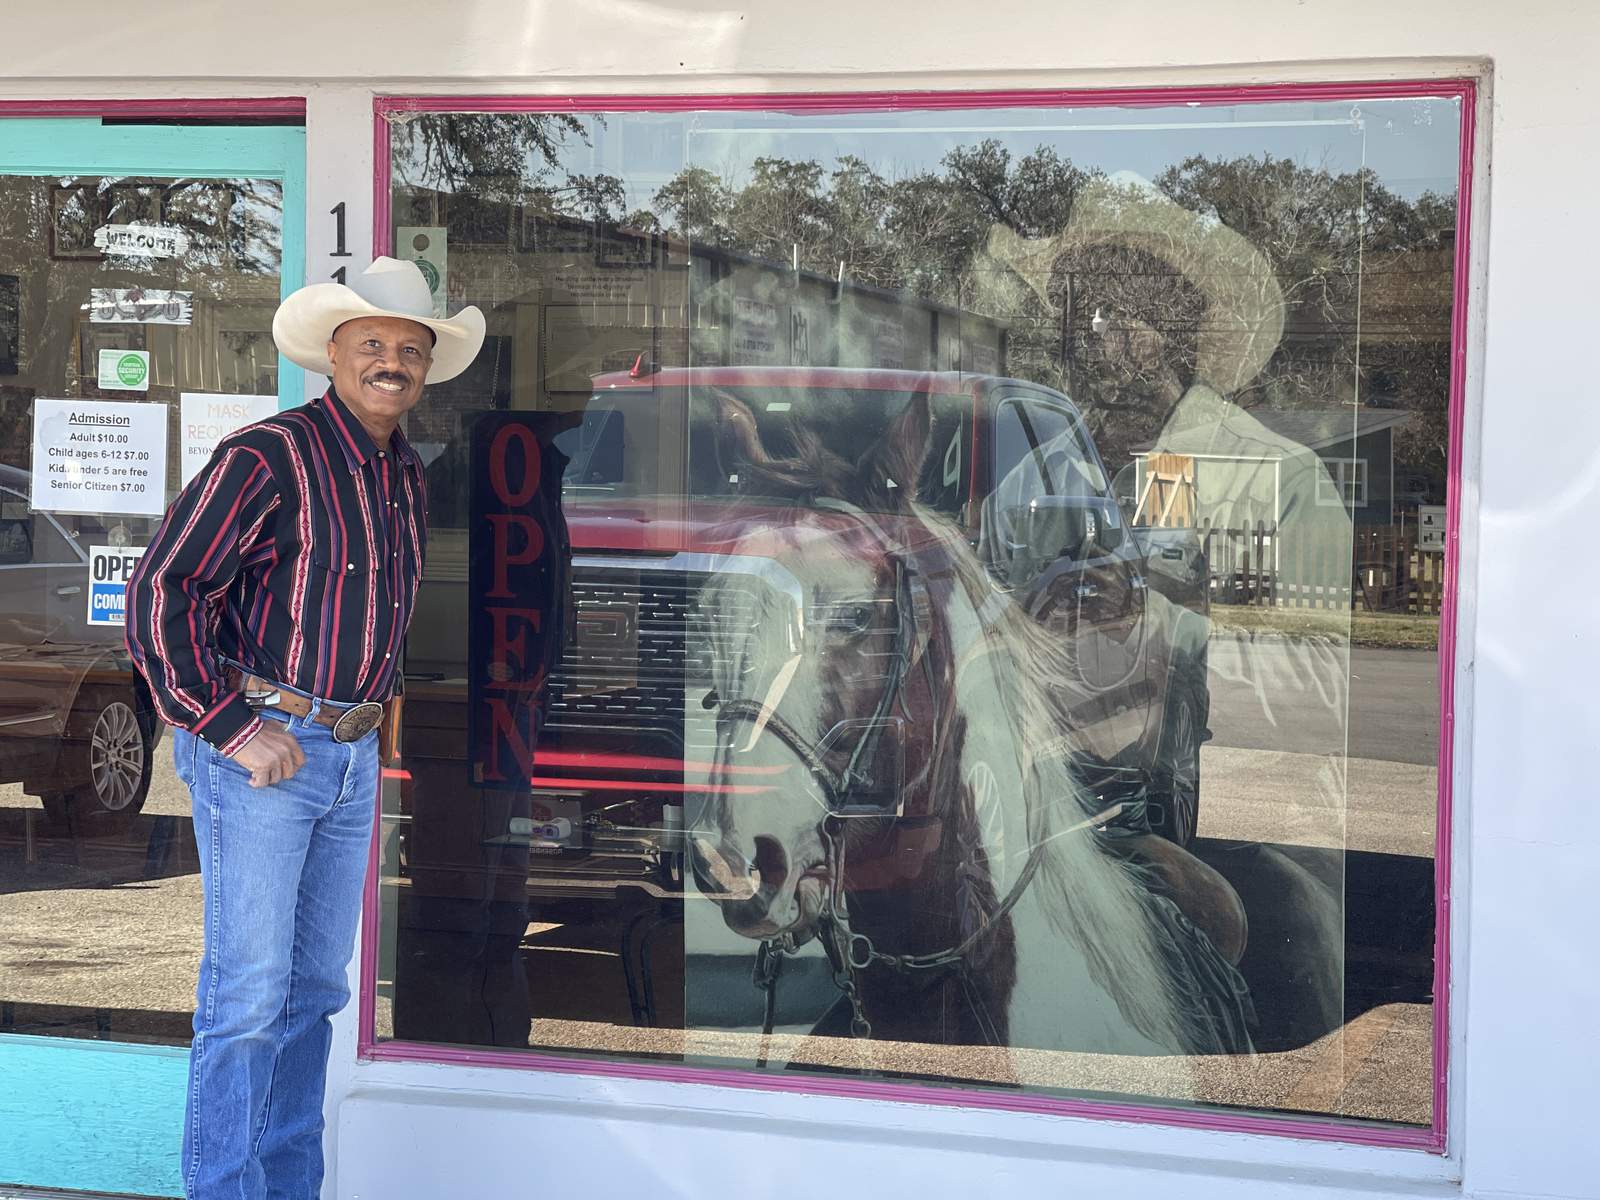 Larry Callies founded and still runs the Black Cowboy Museum in Rosenberg.